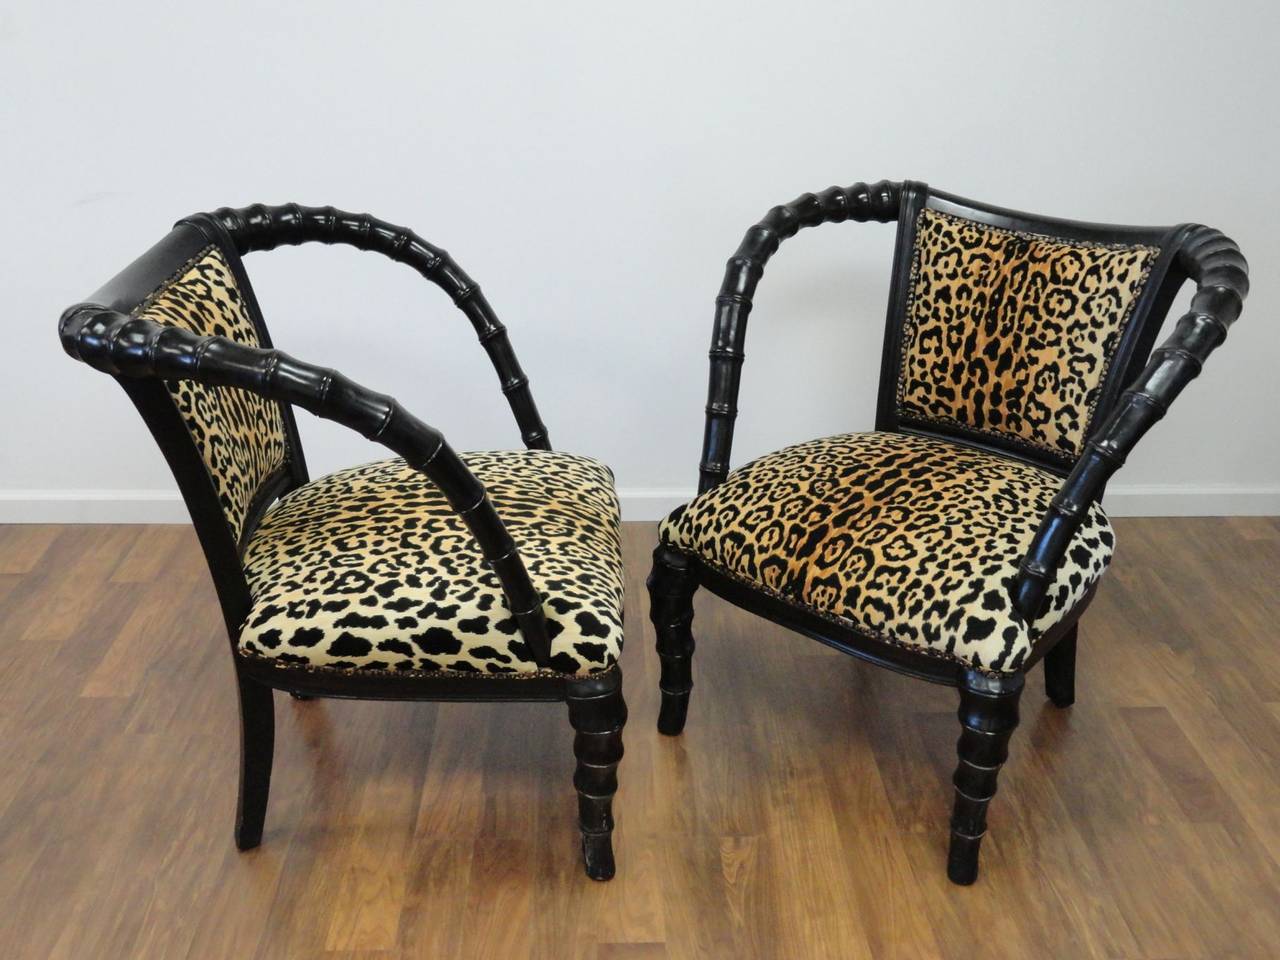 Pair of Exceptional Vintage Faux Gazelle Horn Chairs
Newly Reupholstered